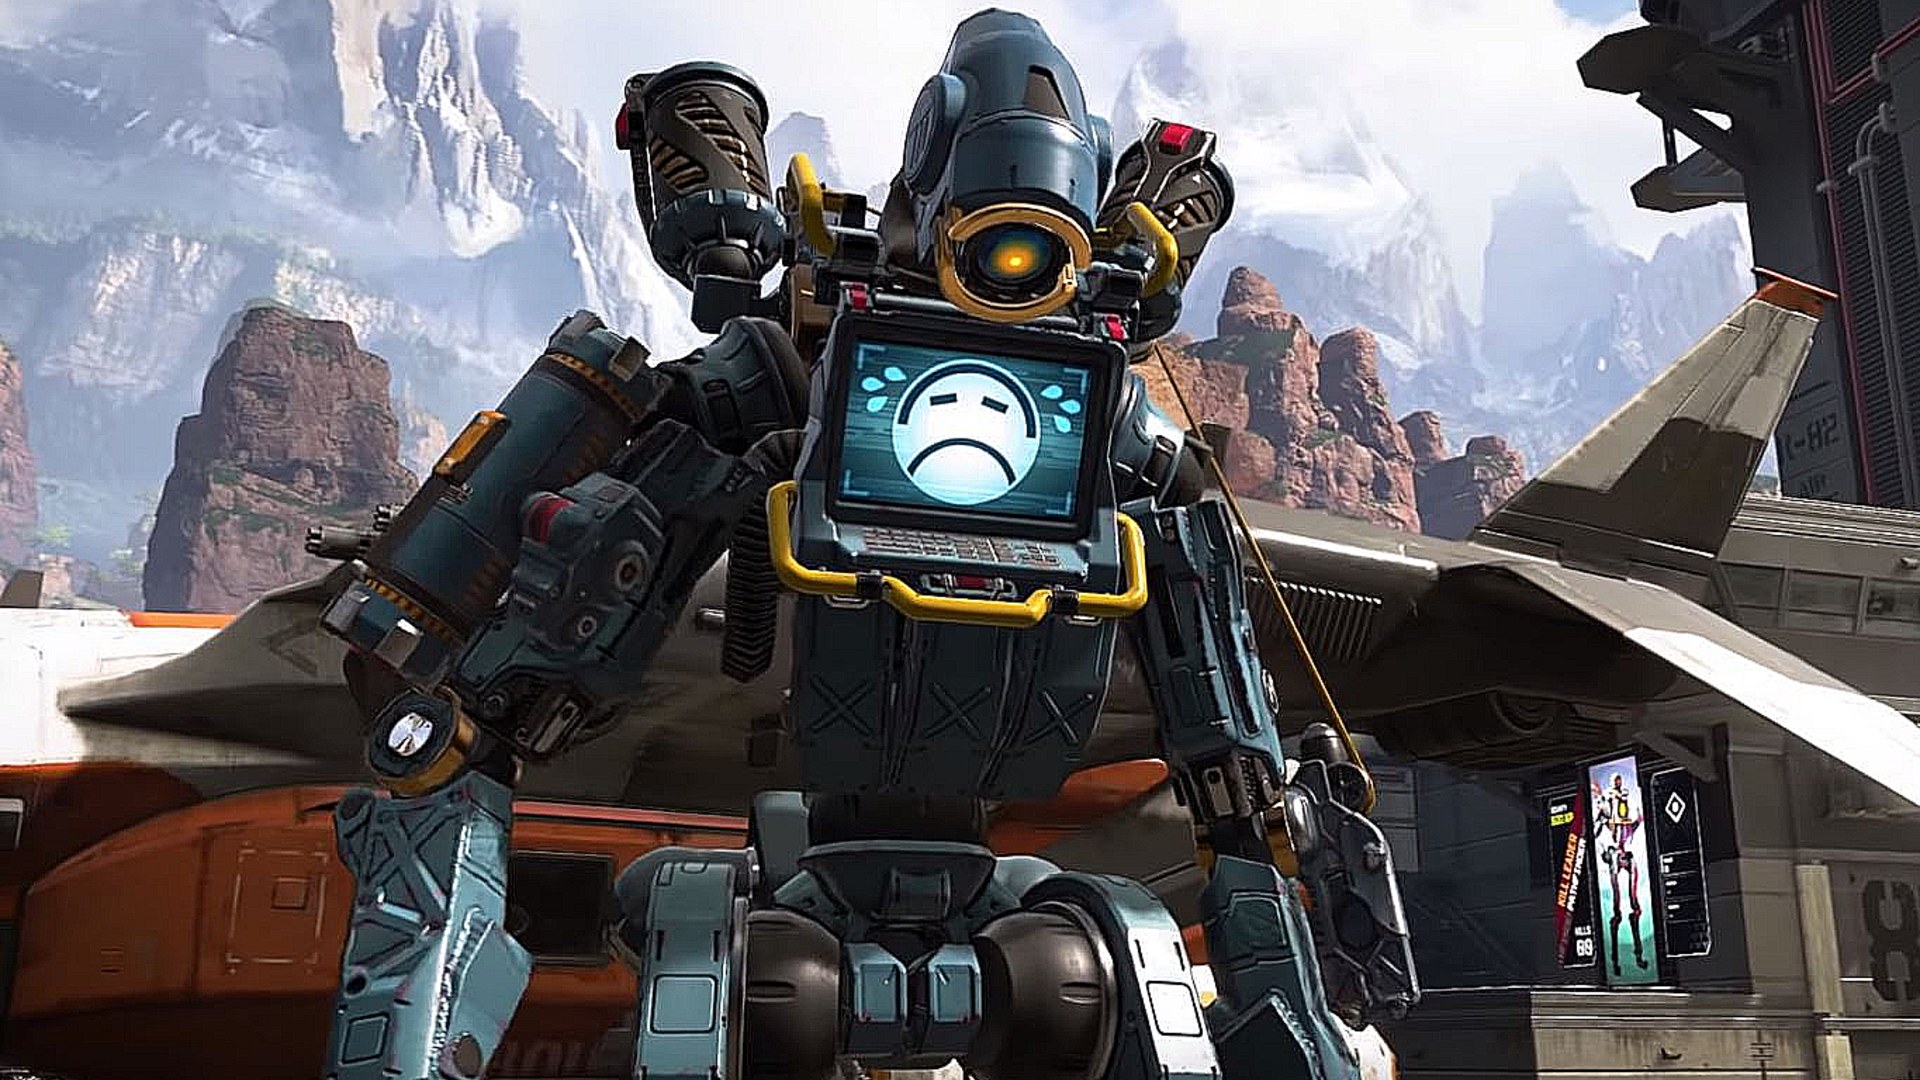 You can reach the top of Train Yard in Apex Legends without using